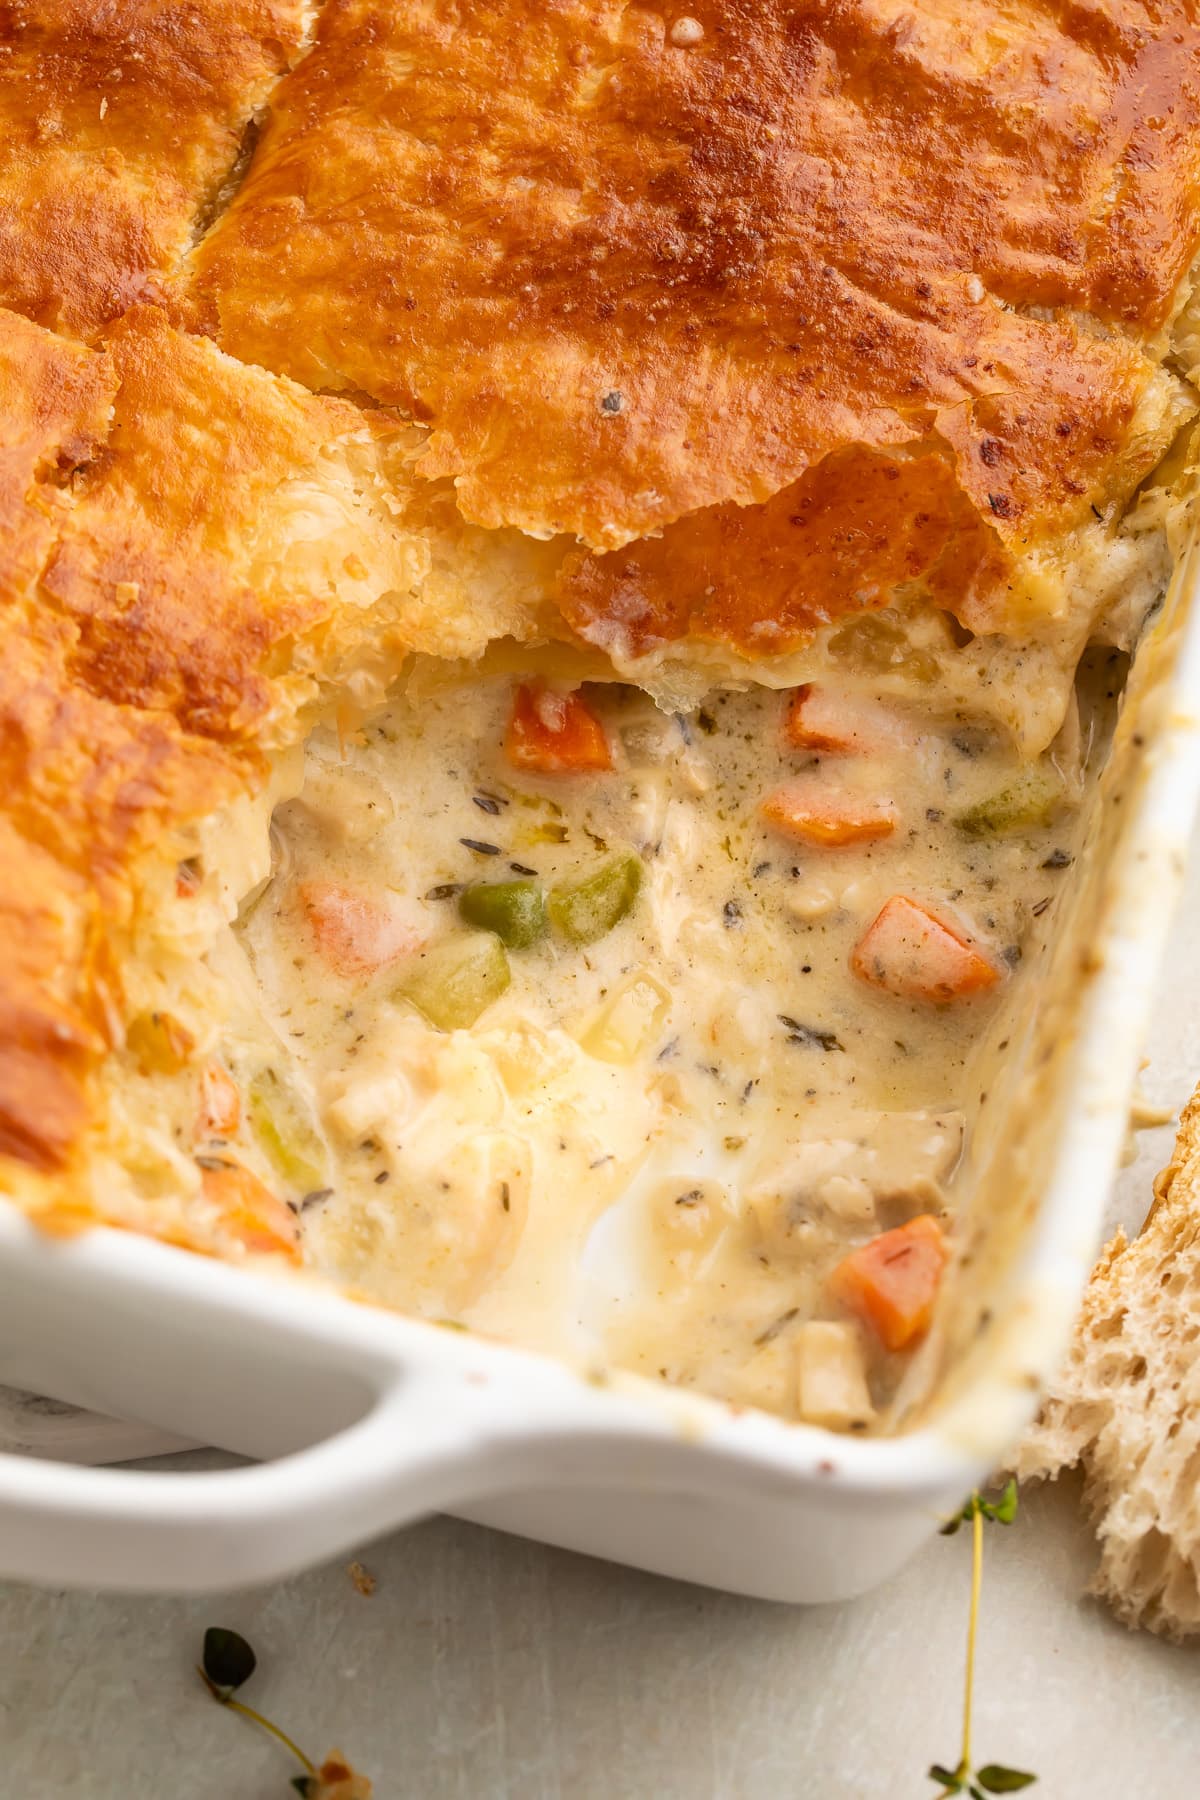 Chicken pot pie casserole in a square dish, with a corner scooped out to show some of the filling.